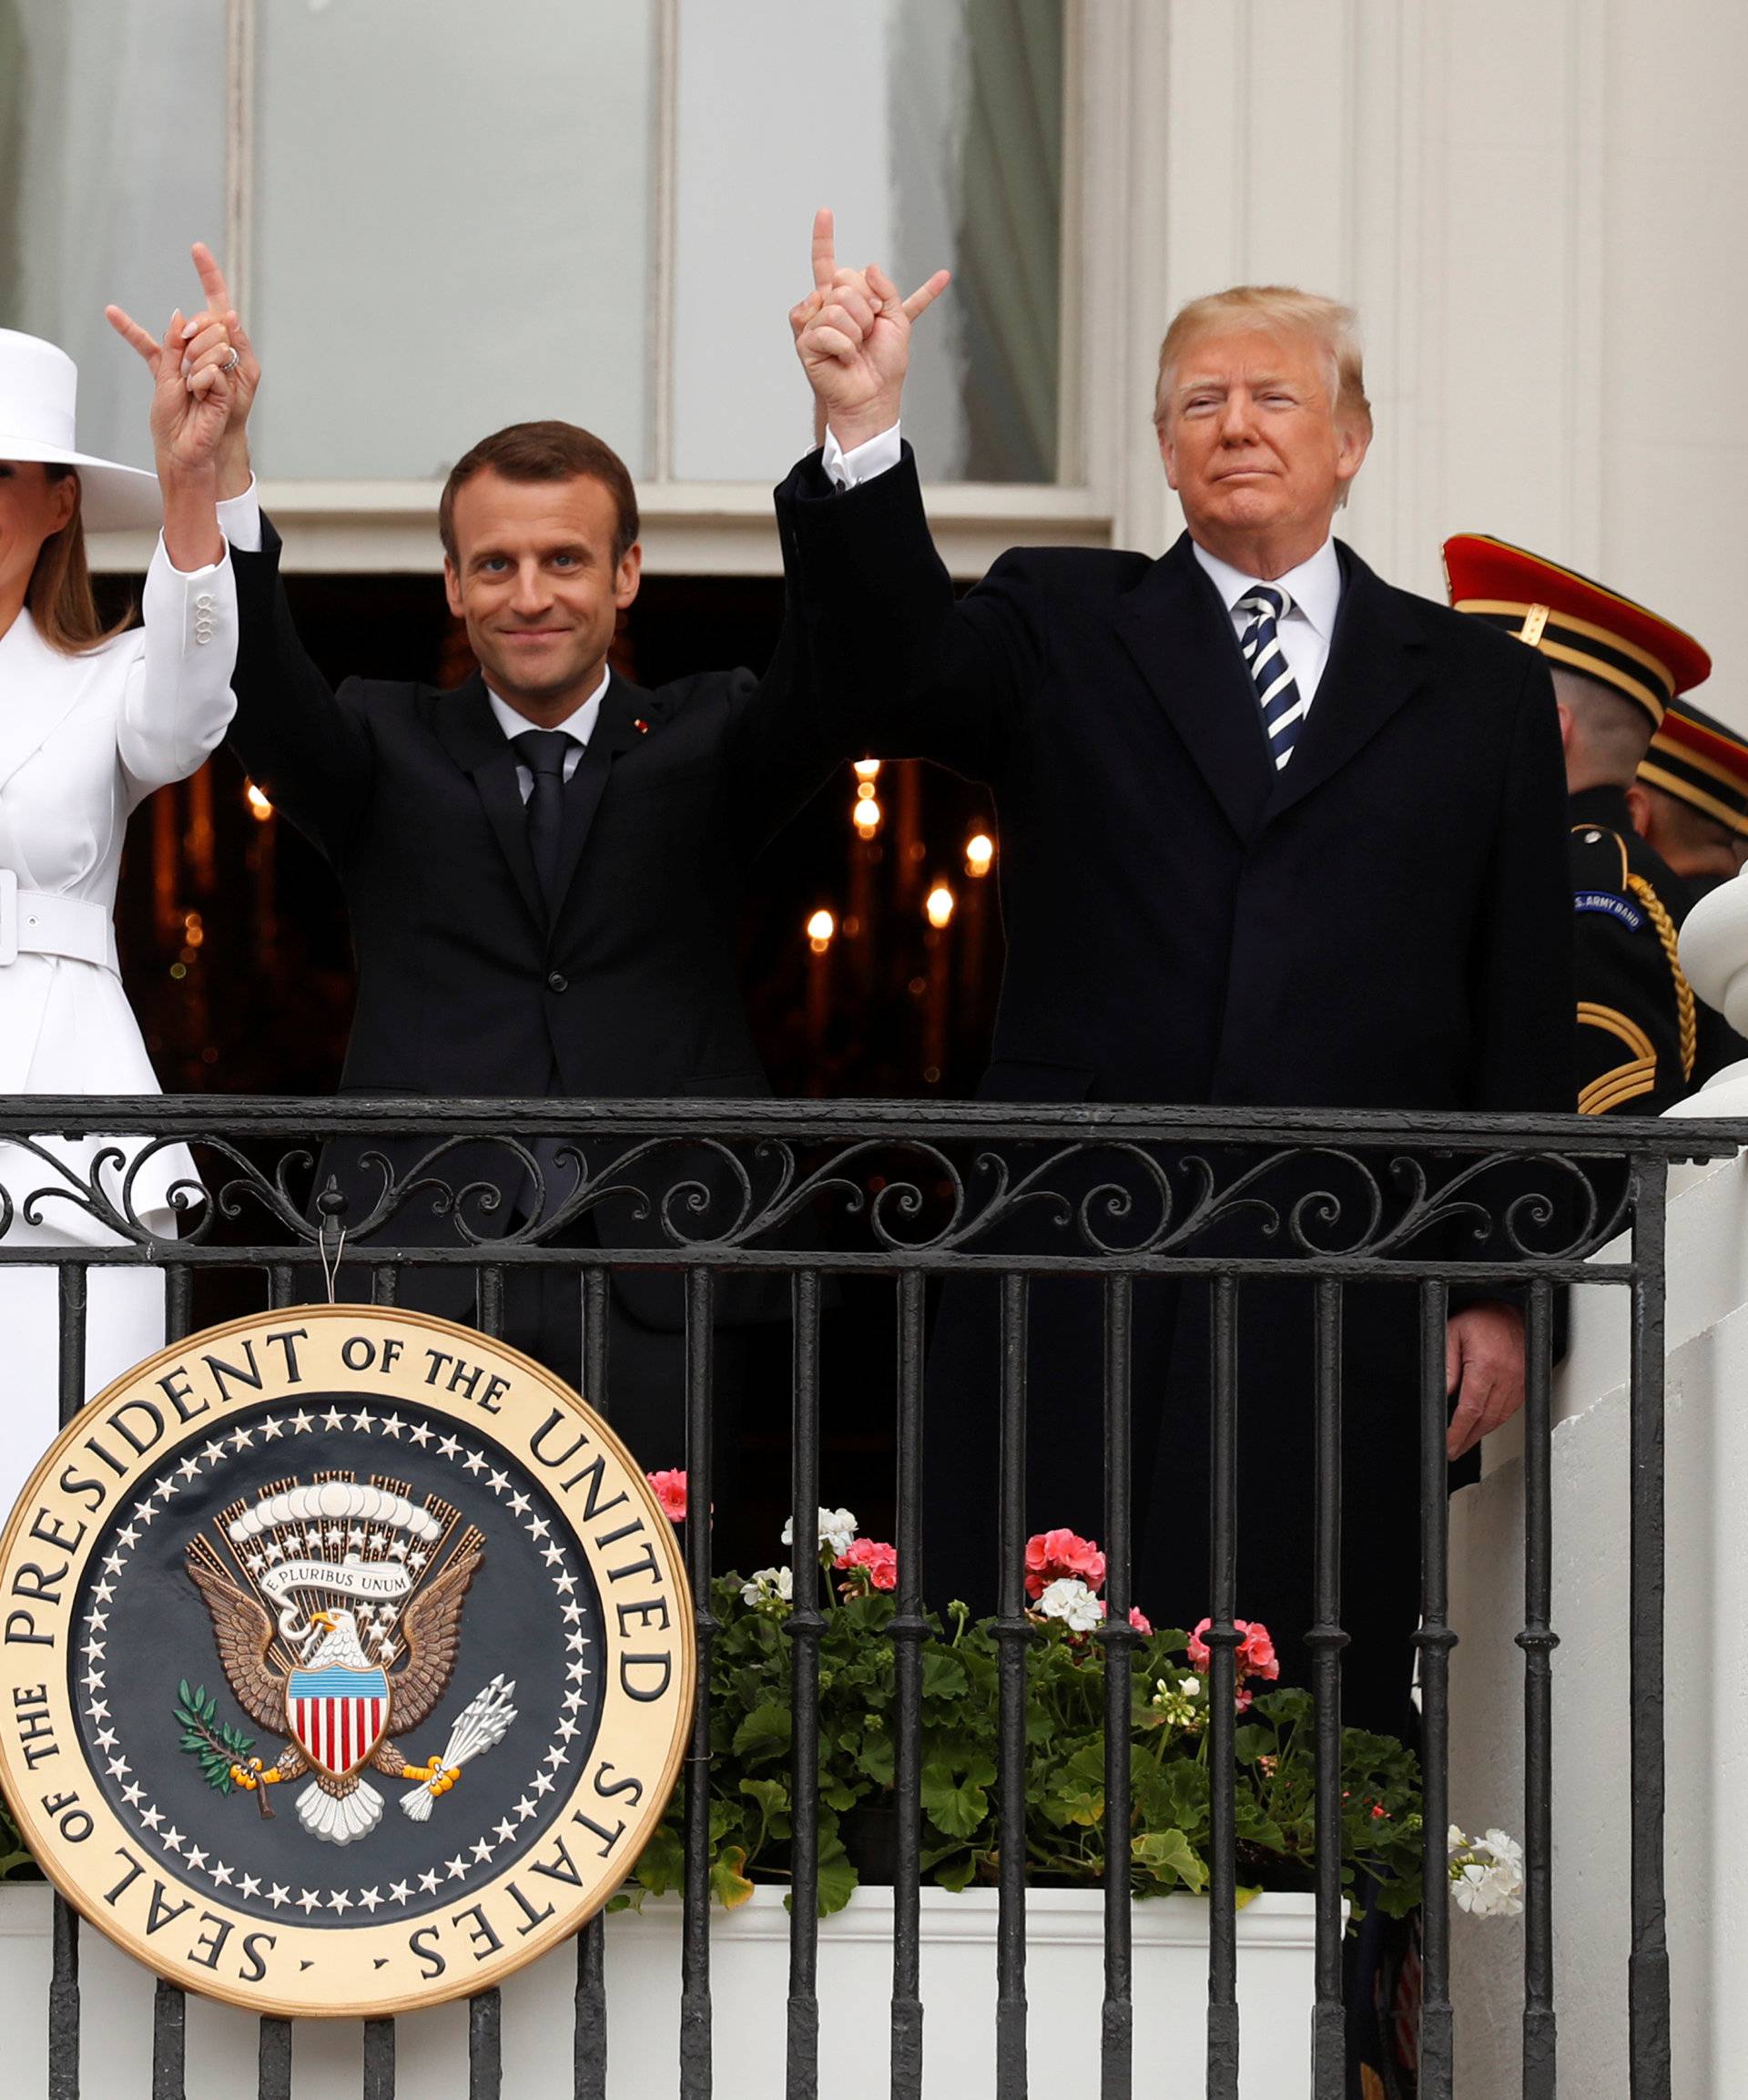 Trump holds a state visit for French President Macron at the White House in Washington